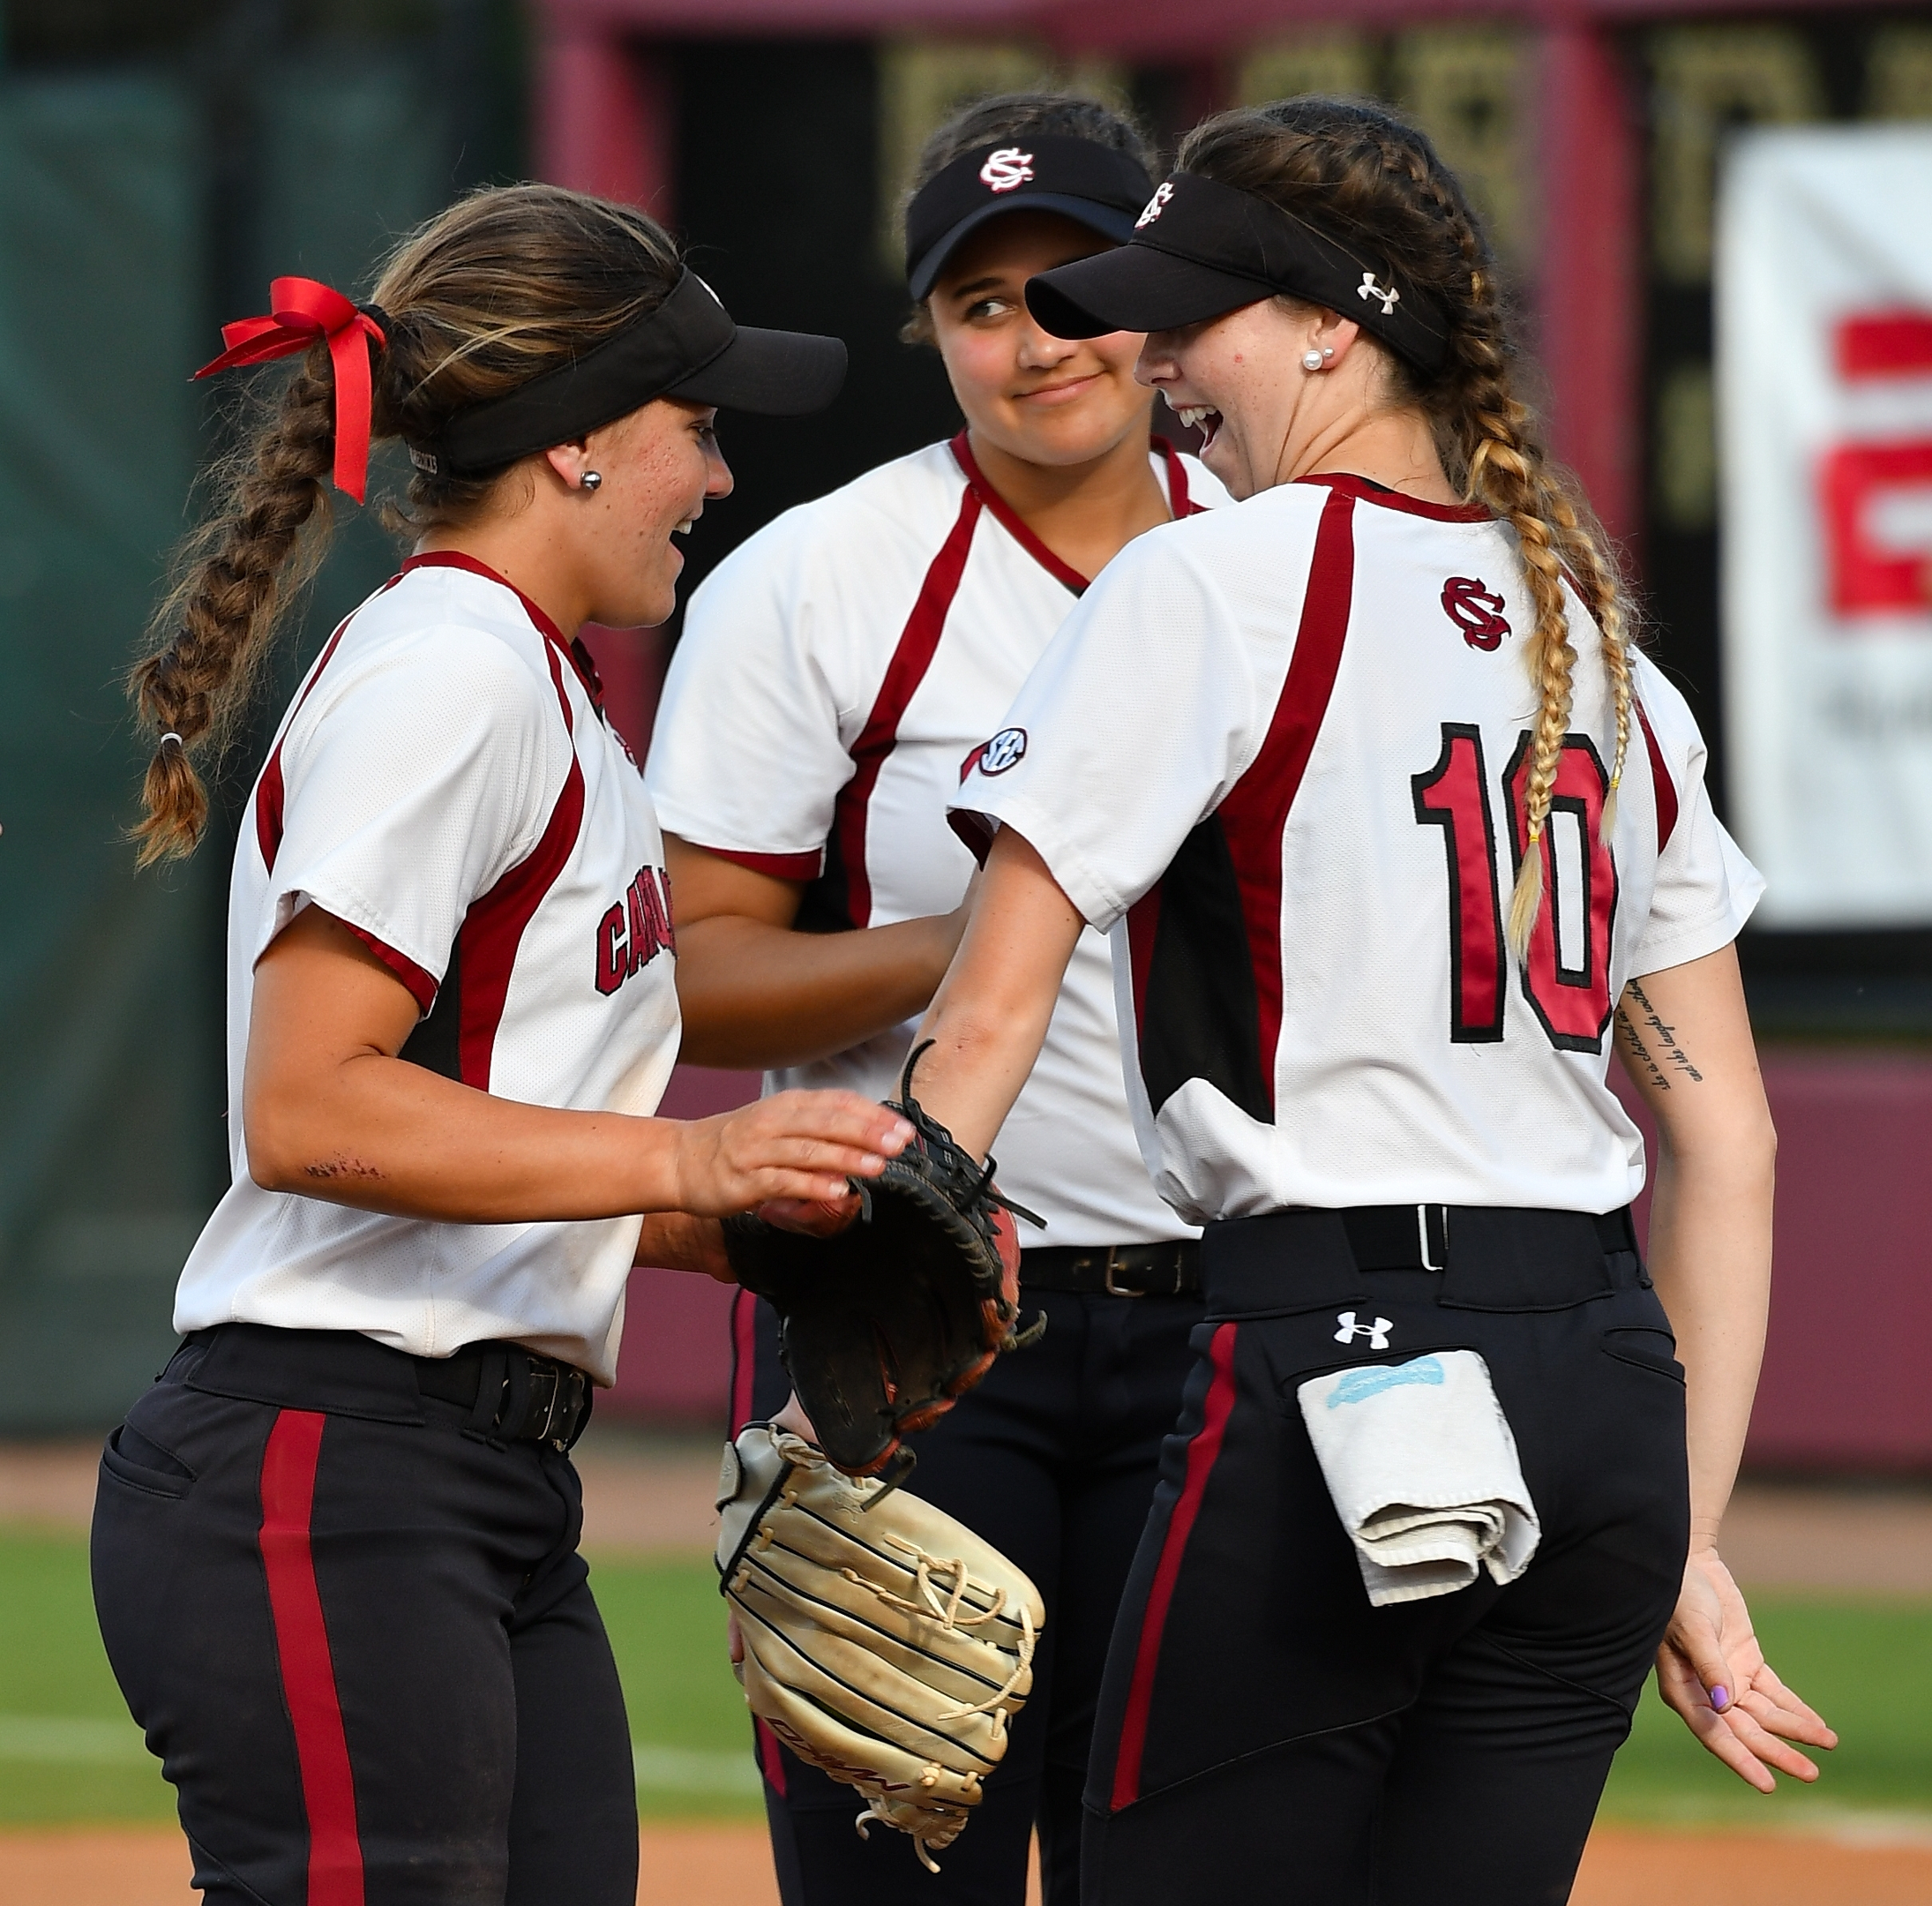 Gamecock Softball Tryout Meeting Set for Wed., Aug. 24